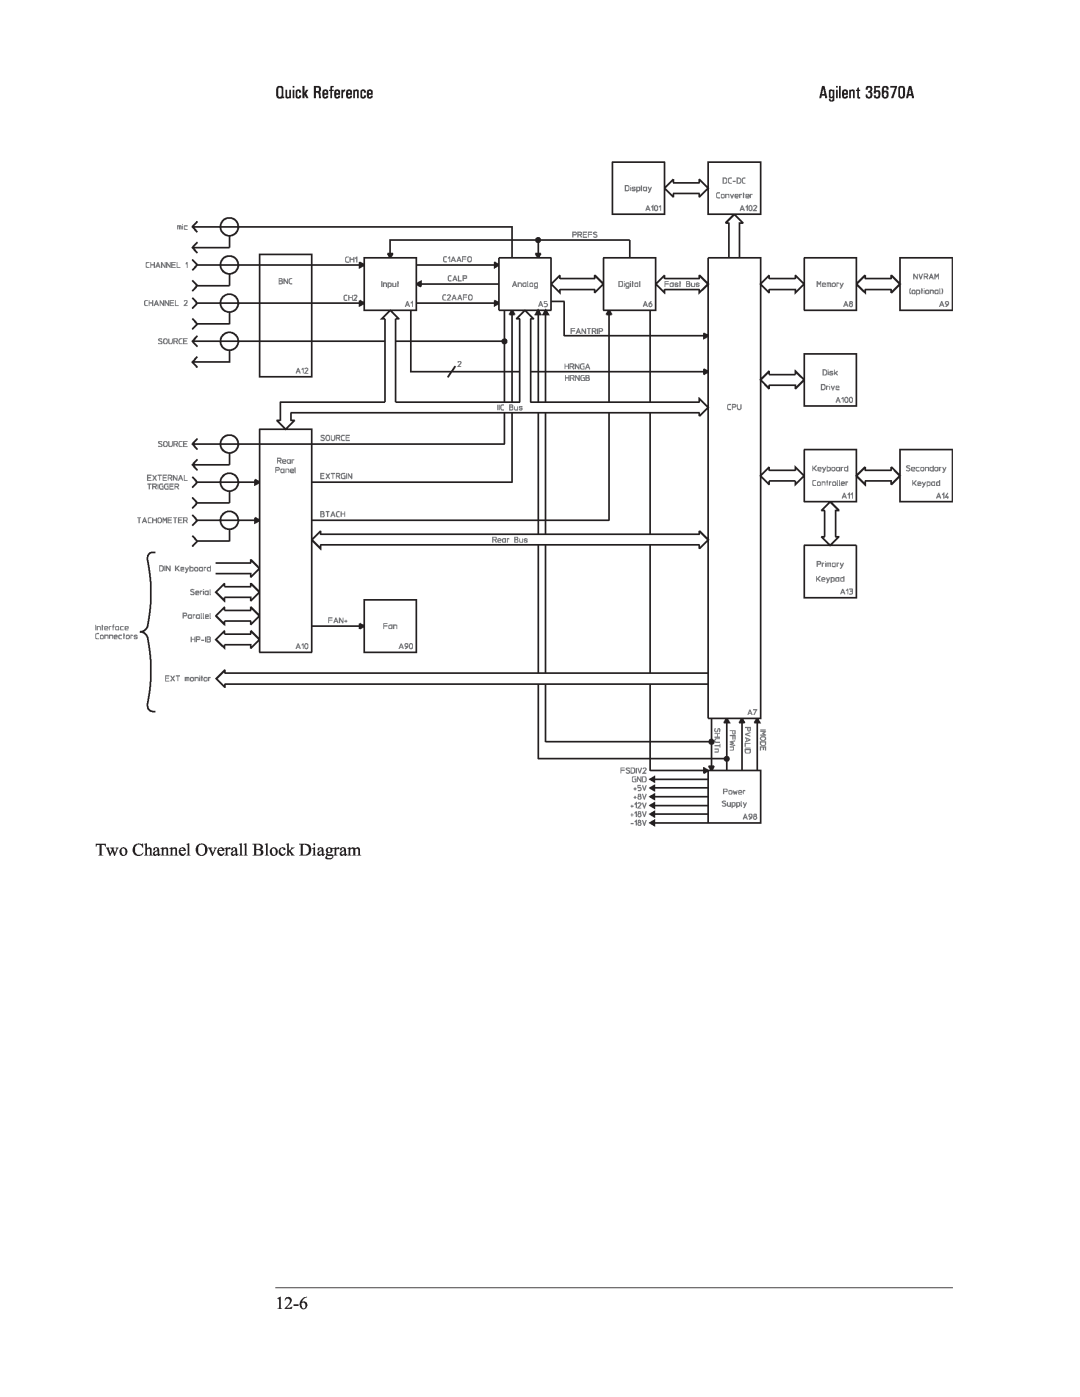 Agilent Technologies 35670-90066 manual Quick Reference, Two Channel Overall Block Diagram, Agilent 35670A 